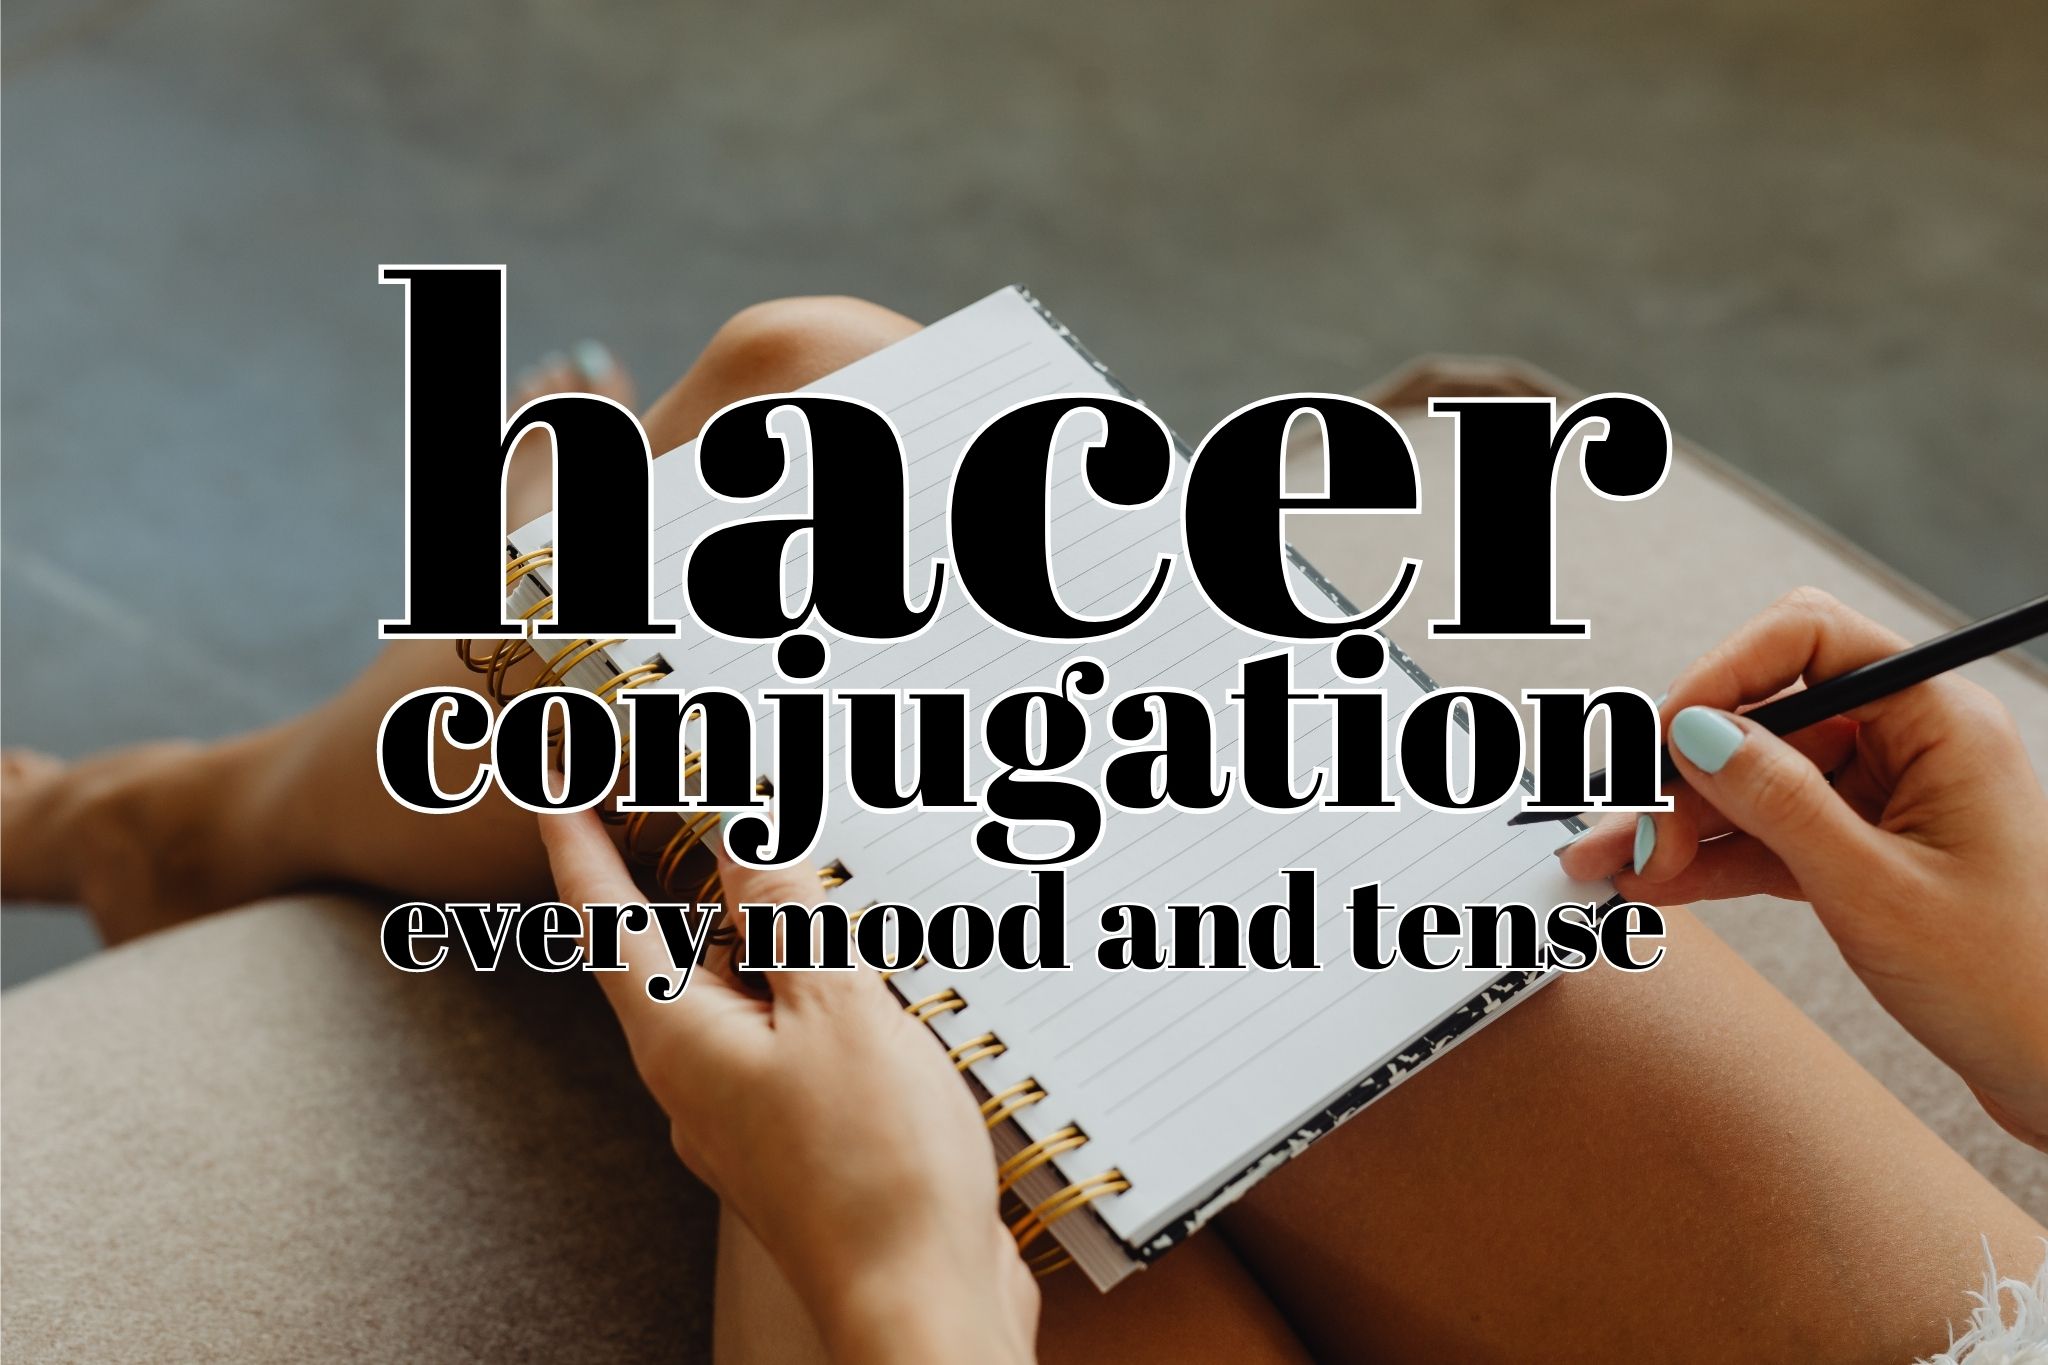 Hacer conjugation in Spanish, in every mood and tense